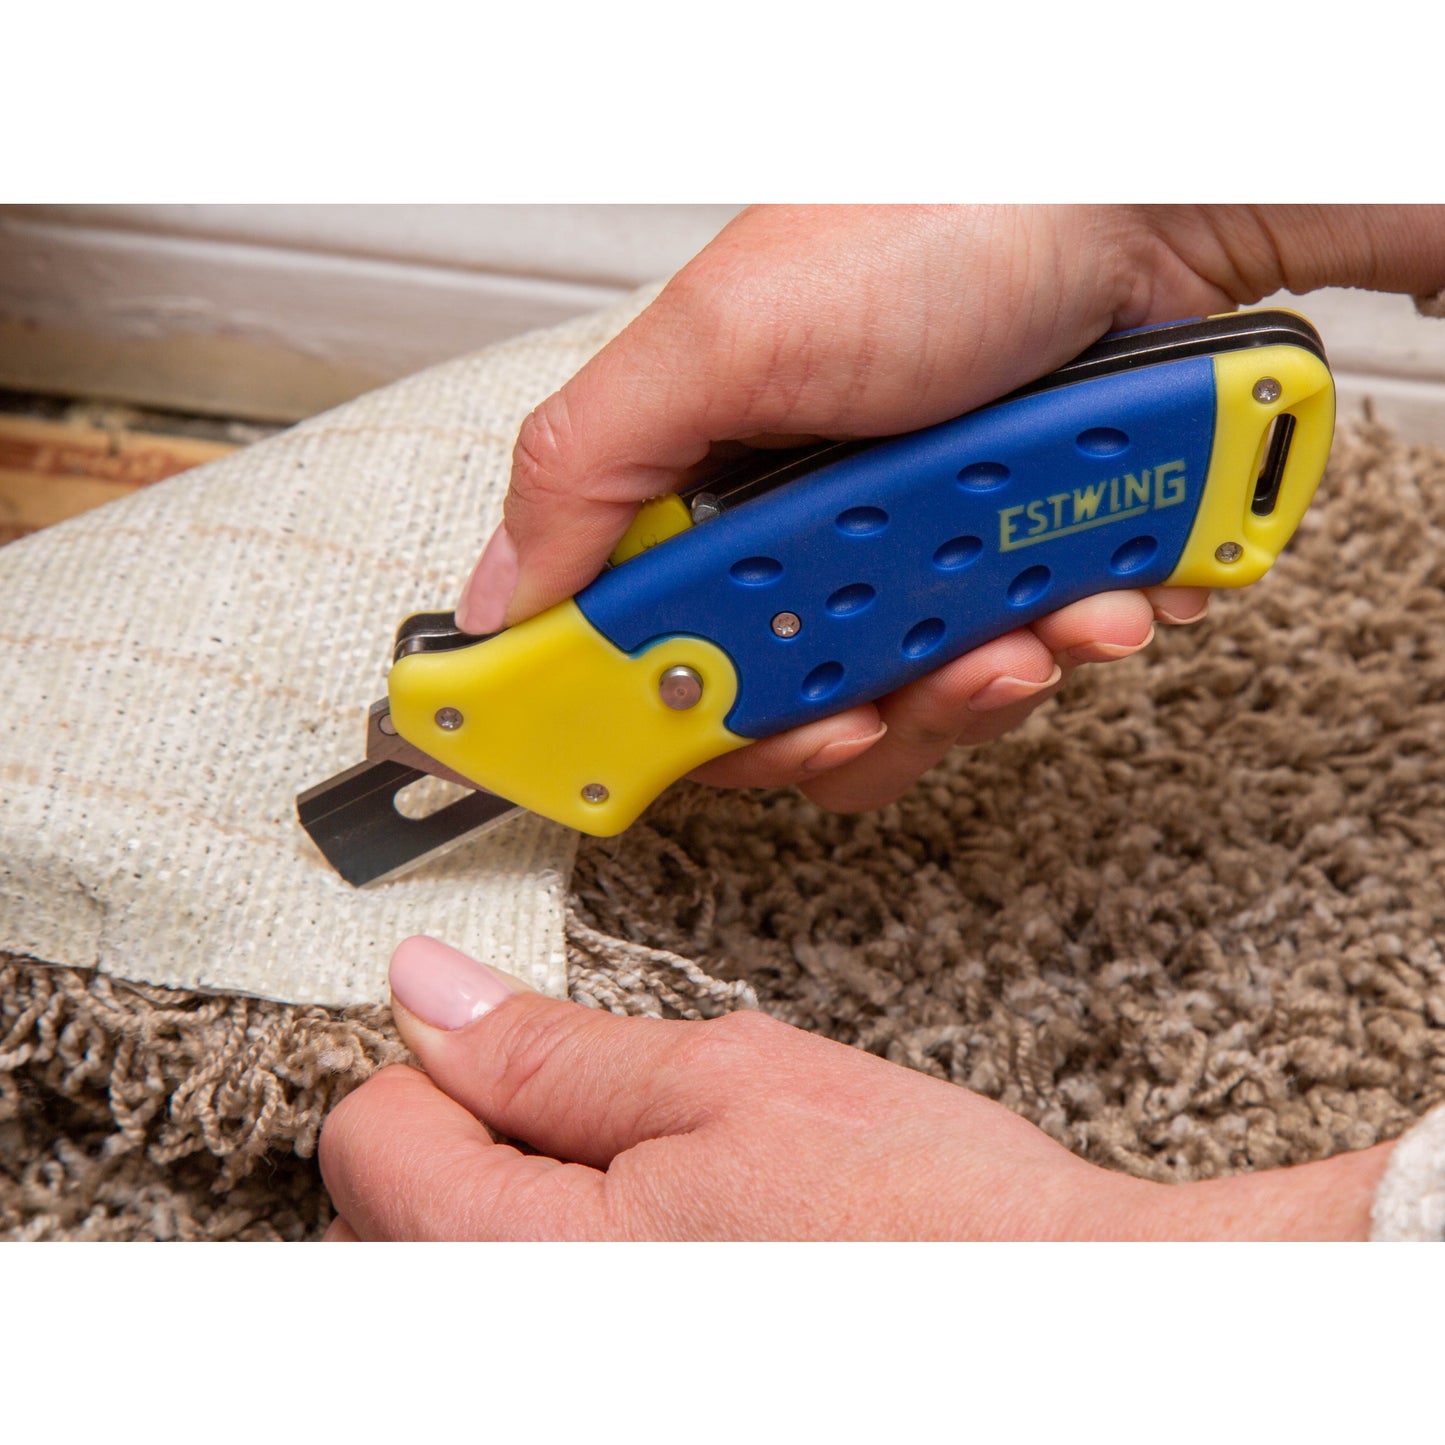 3-In-1 Angle Adjusting Retractable Carpet / Flooring and Utility Knife